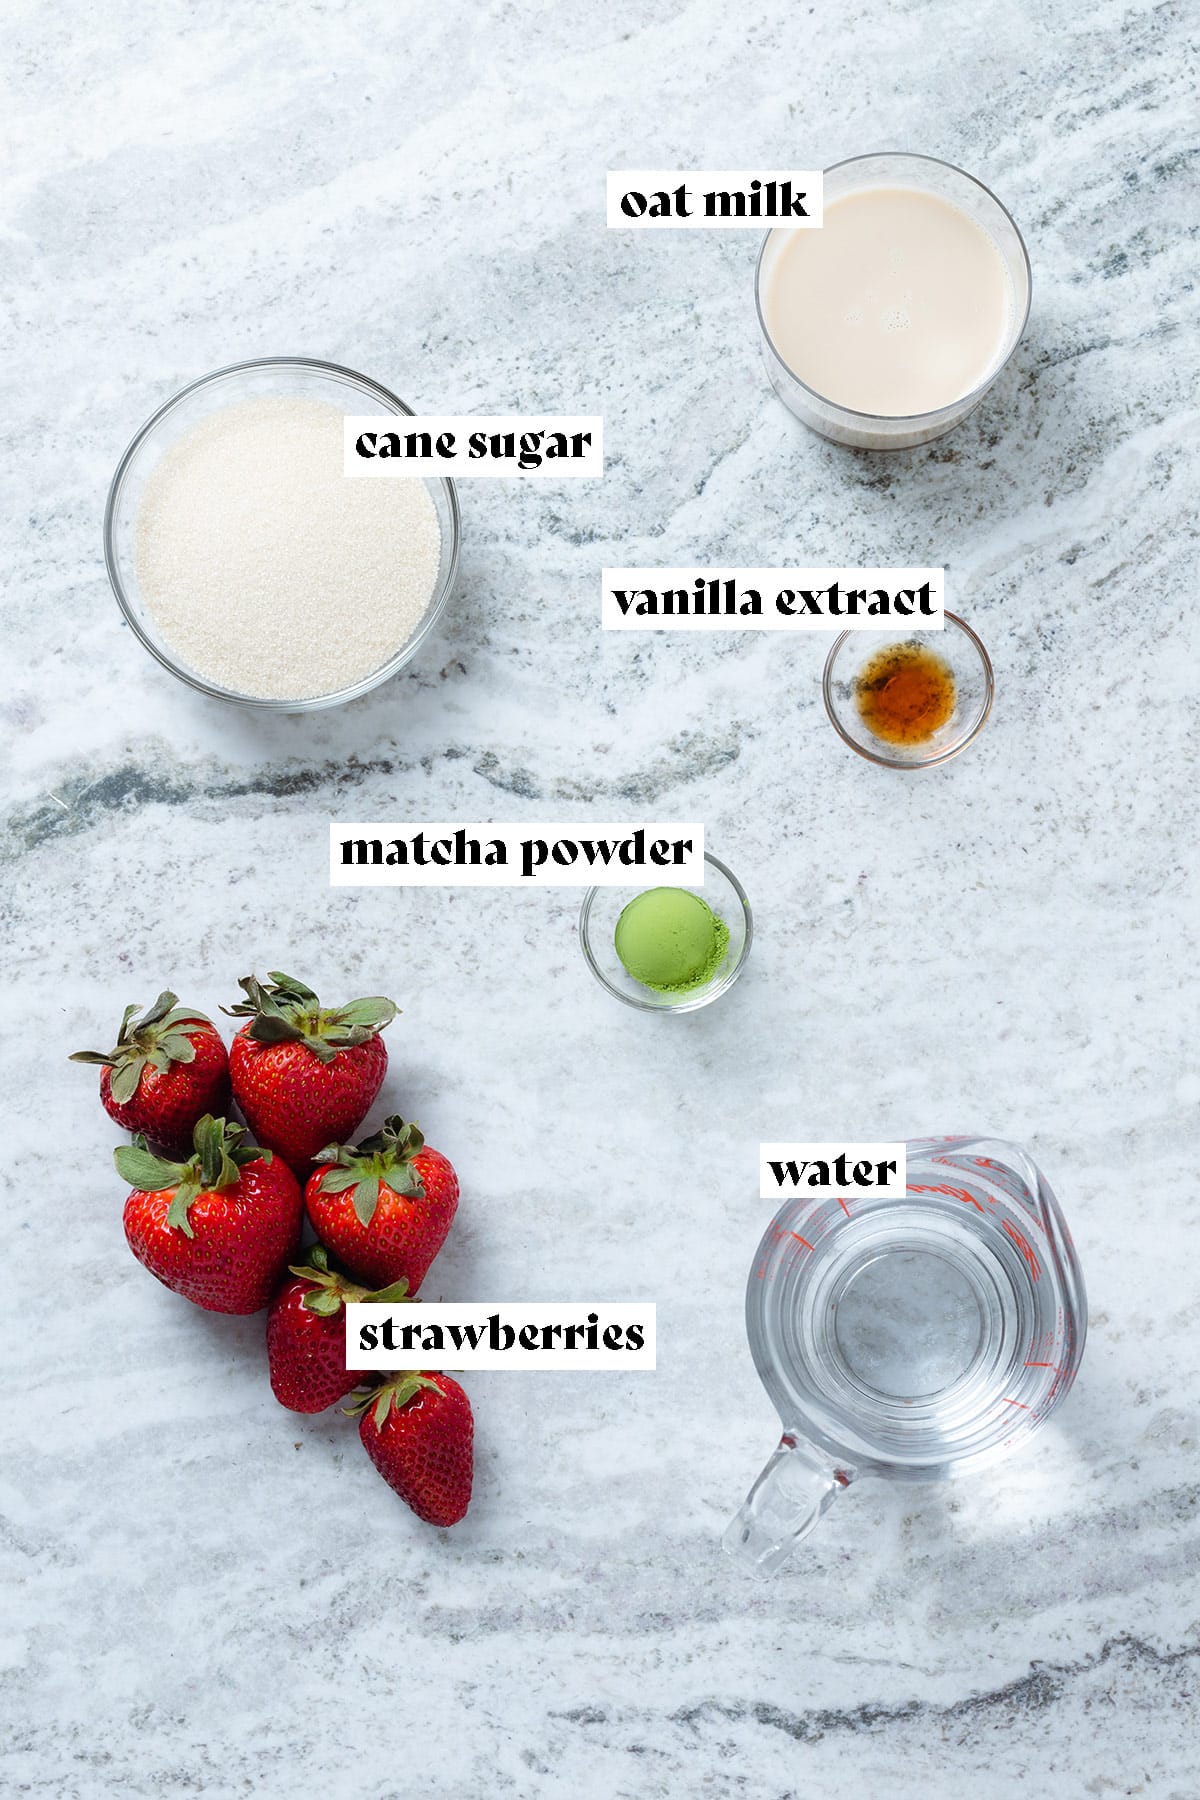 Ingredients like strawberries, milk, cane sugar, and matcha laid out on a grey stone background.